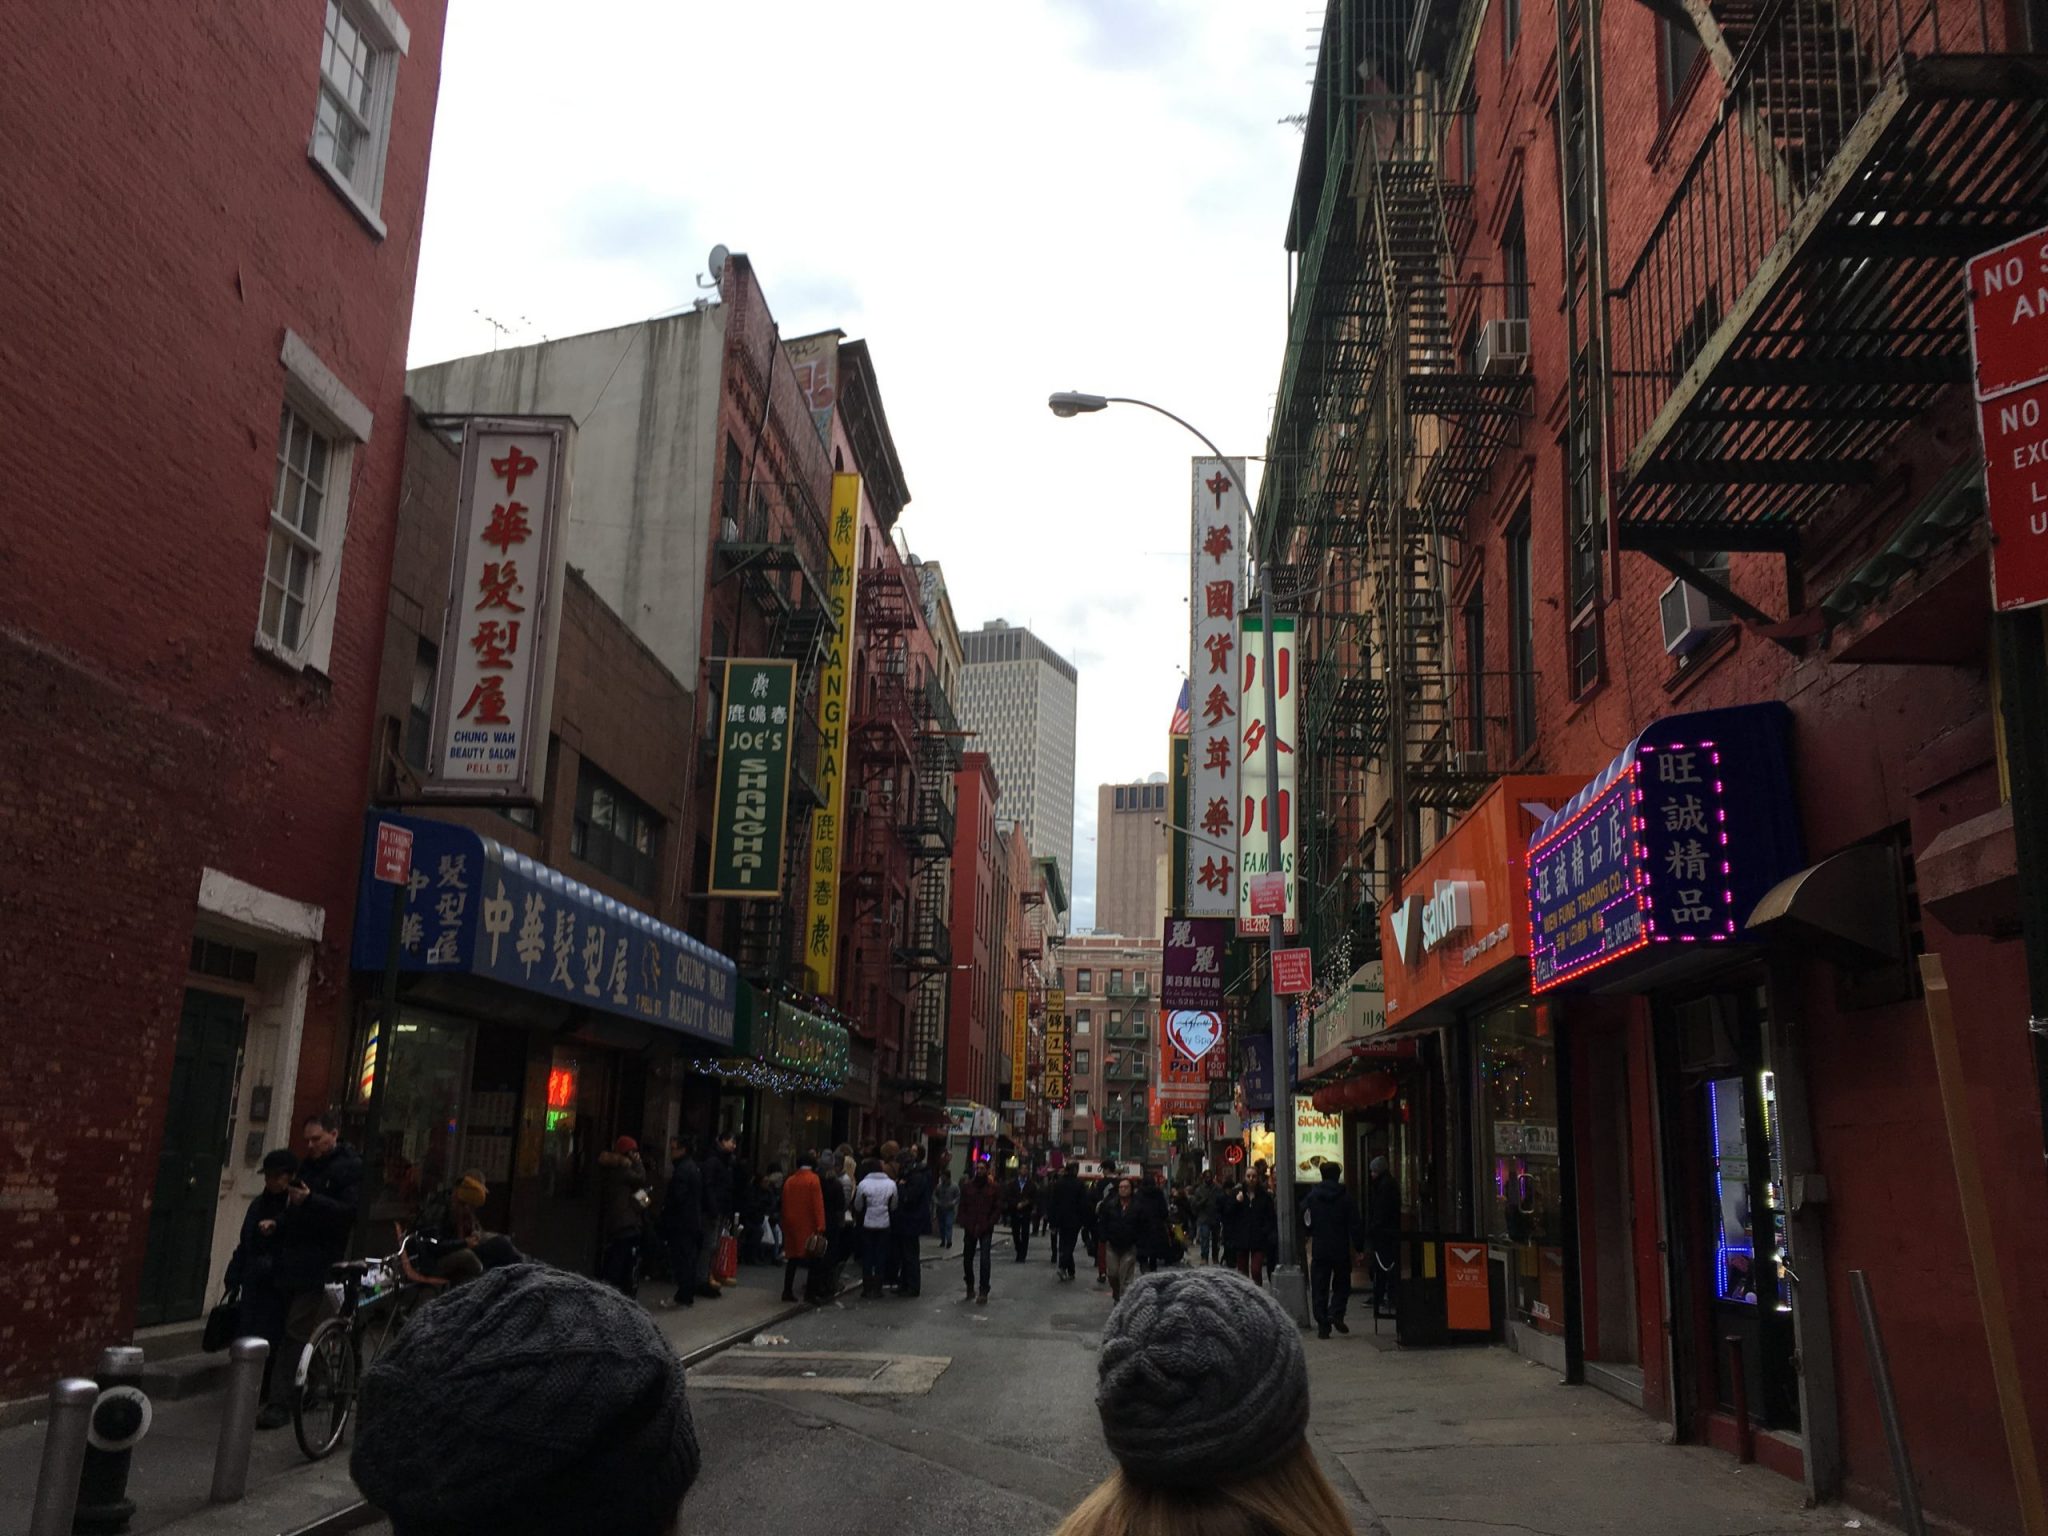 Exploring the streets of Chinatown before New Year's Eve night